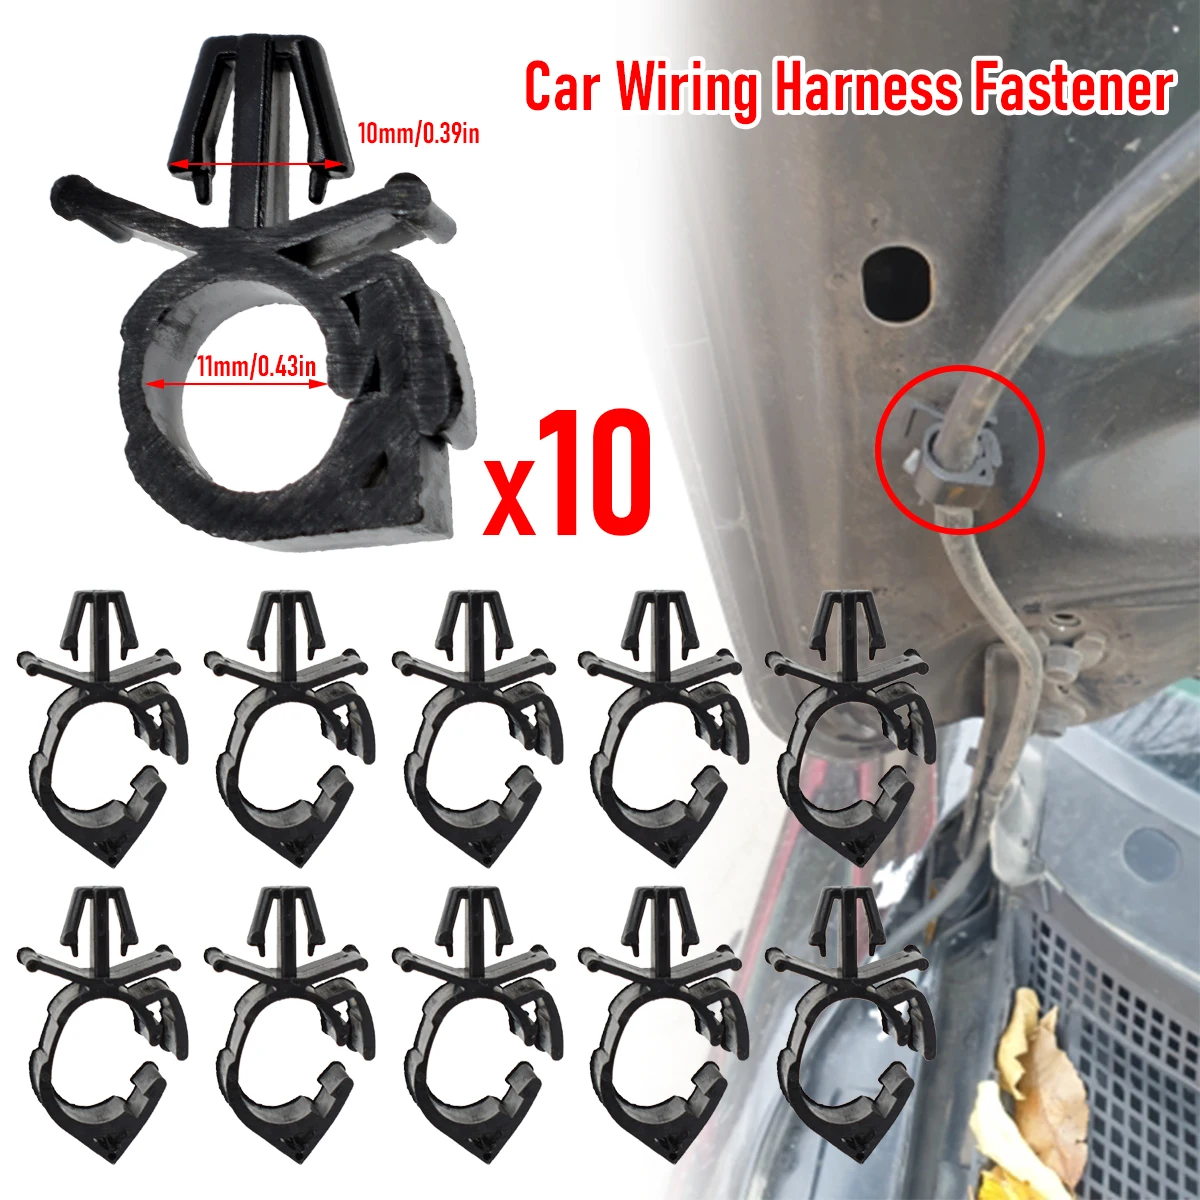 10Pcs Car Wiring Harness Fastener Route Fixed Retainer Clip Corrugated Pipe Tie Wrap Cable Clamp Oil Tube Beam Line Hose Bracket